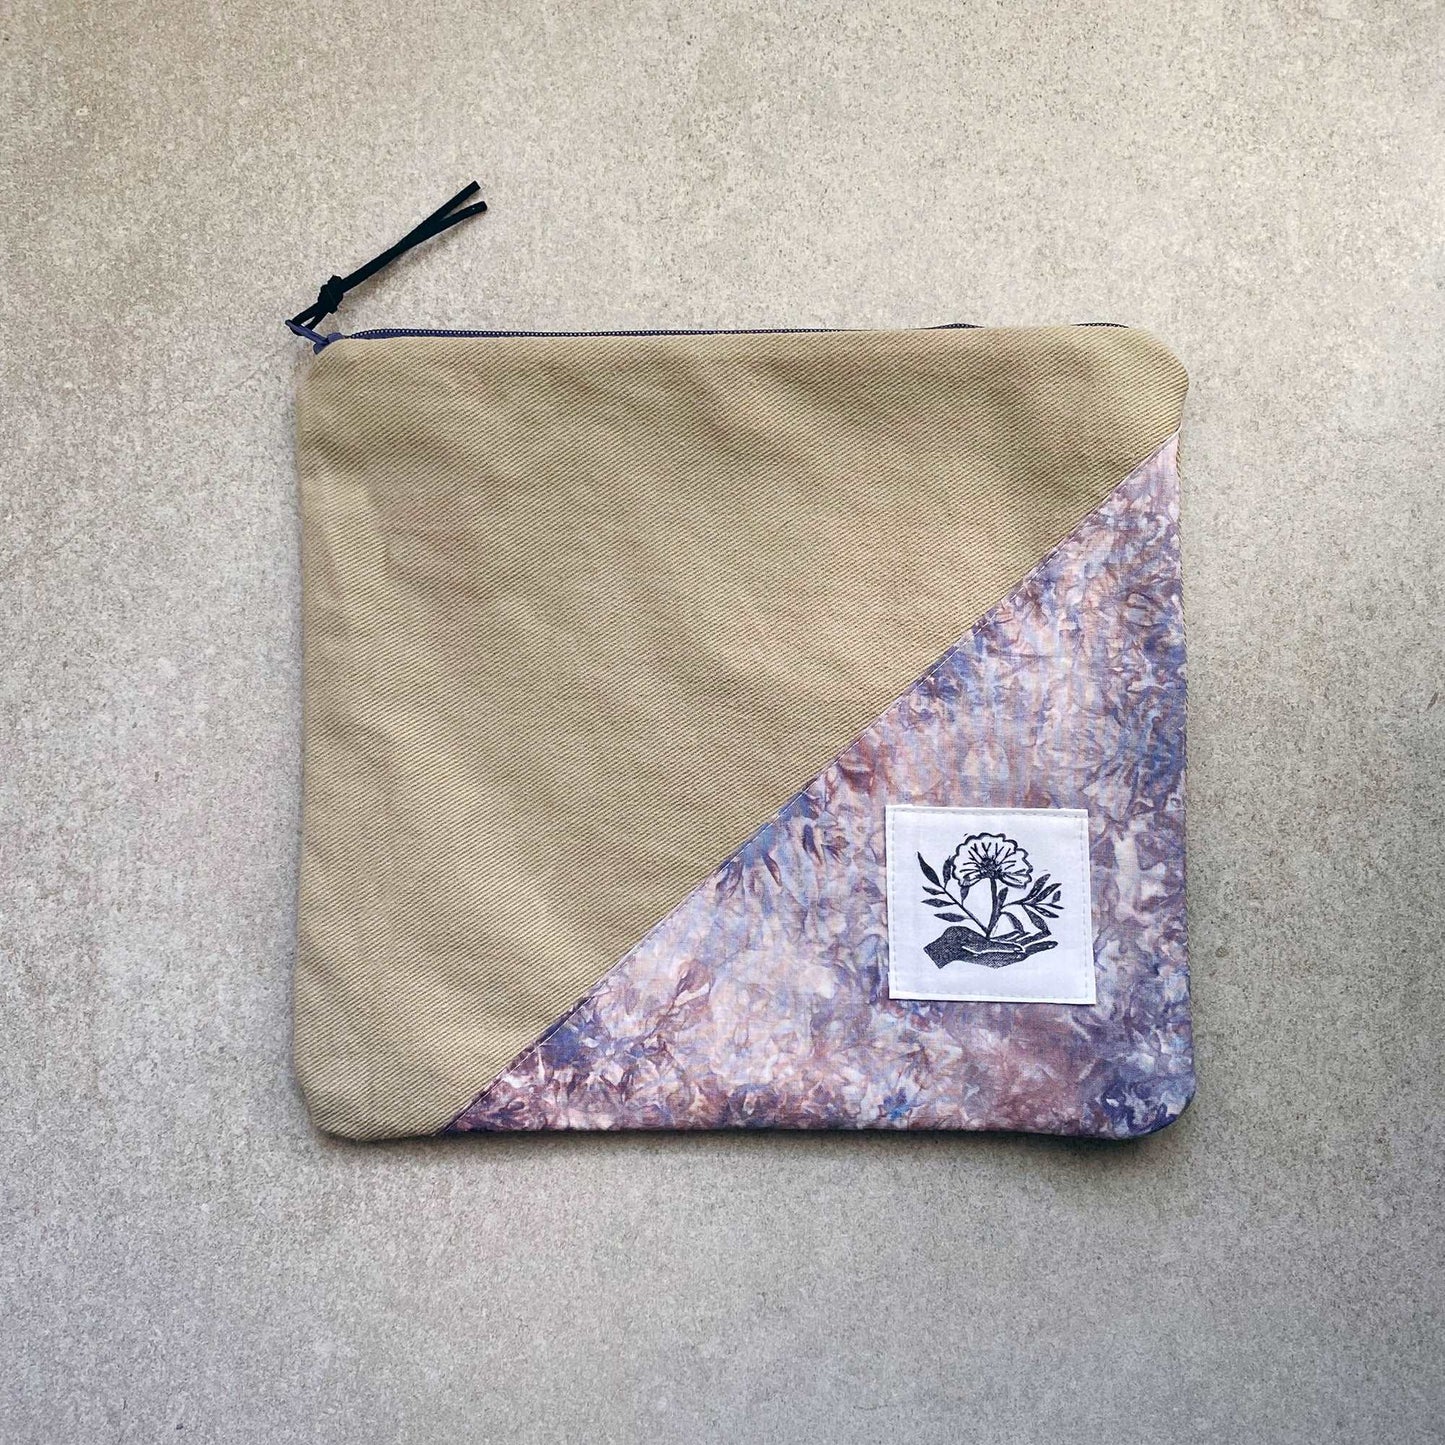 This is a photo of a large canvas zipper bag. It has a fabric panel made with ice dyed fabric that has several colors of purple and blue on it. It is laying on a light gray background.